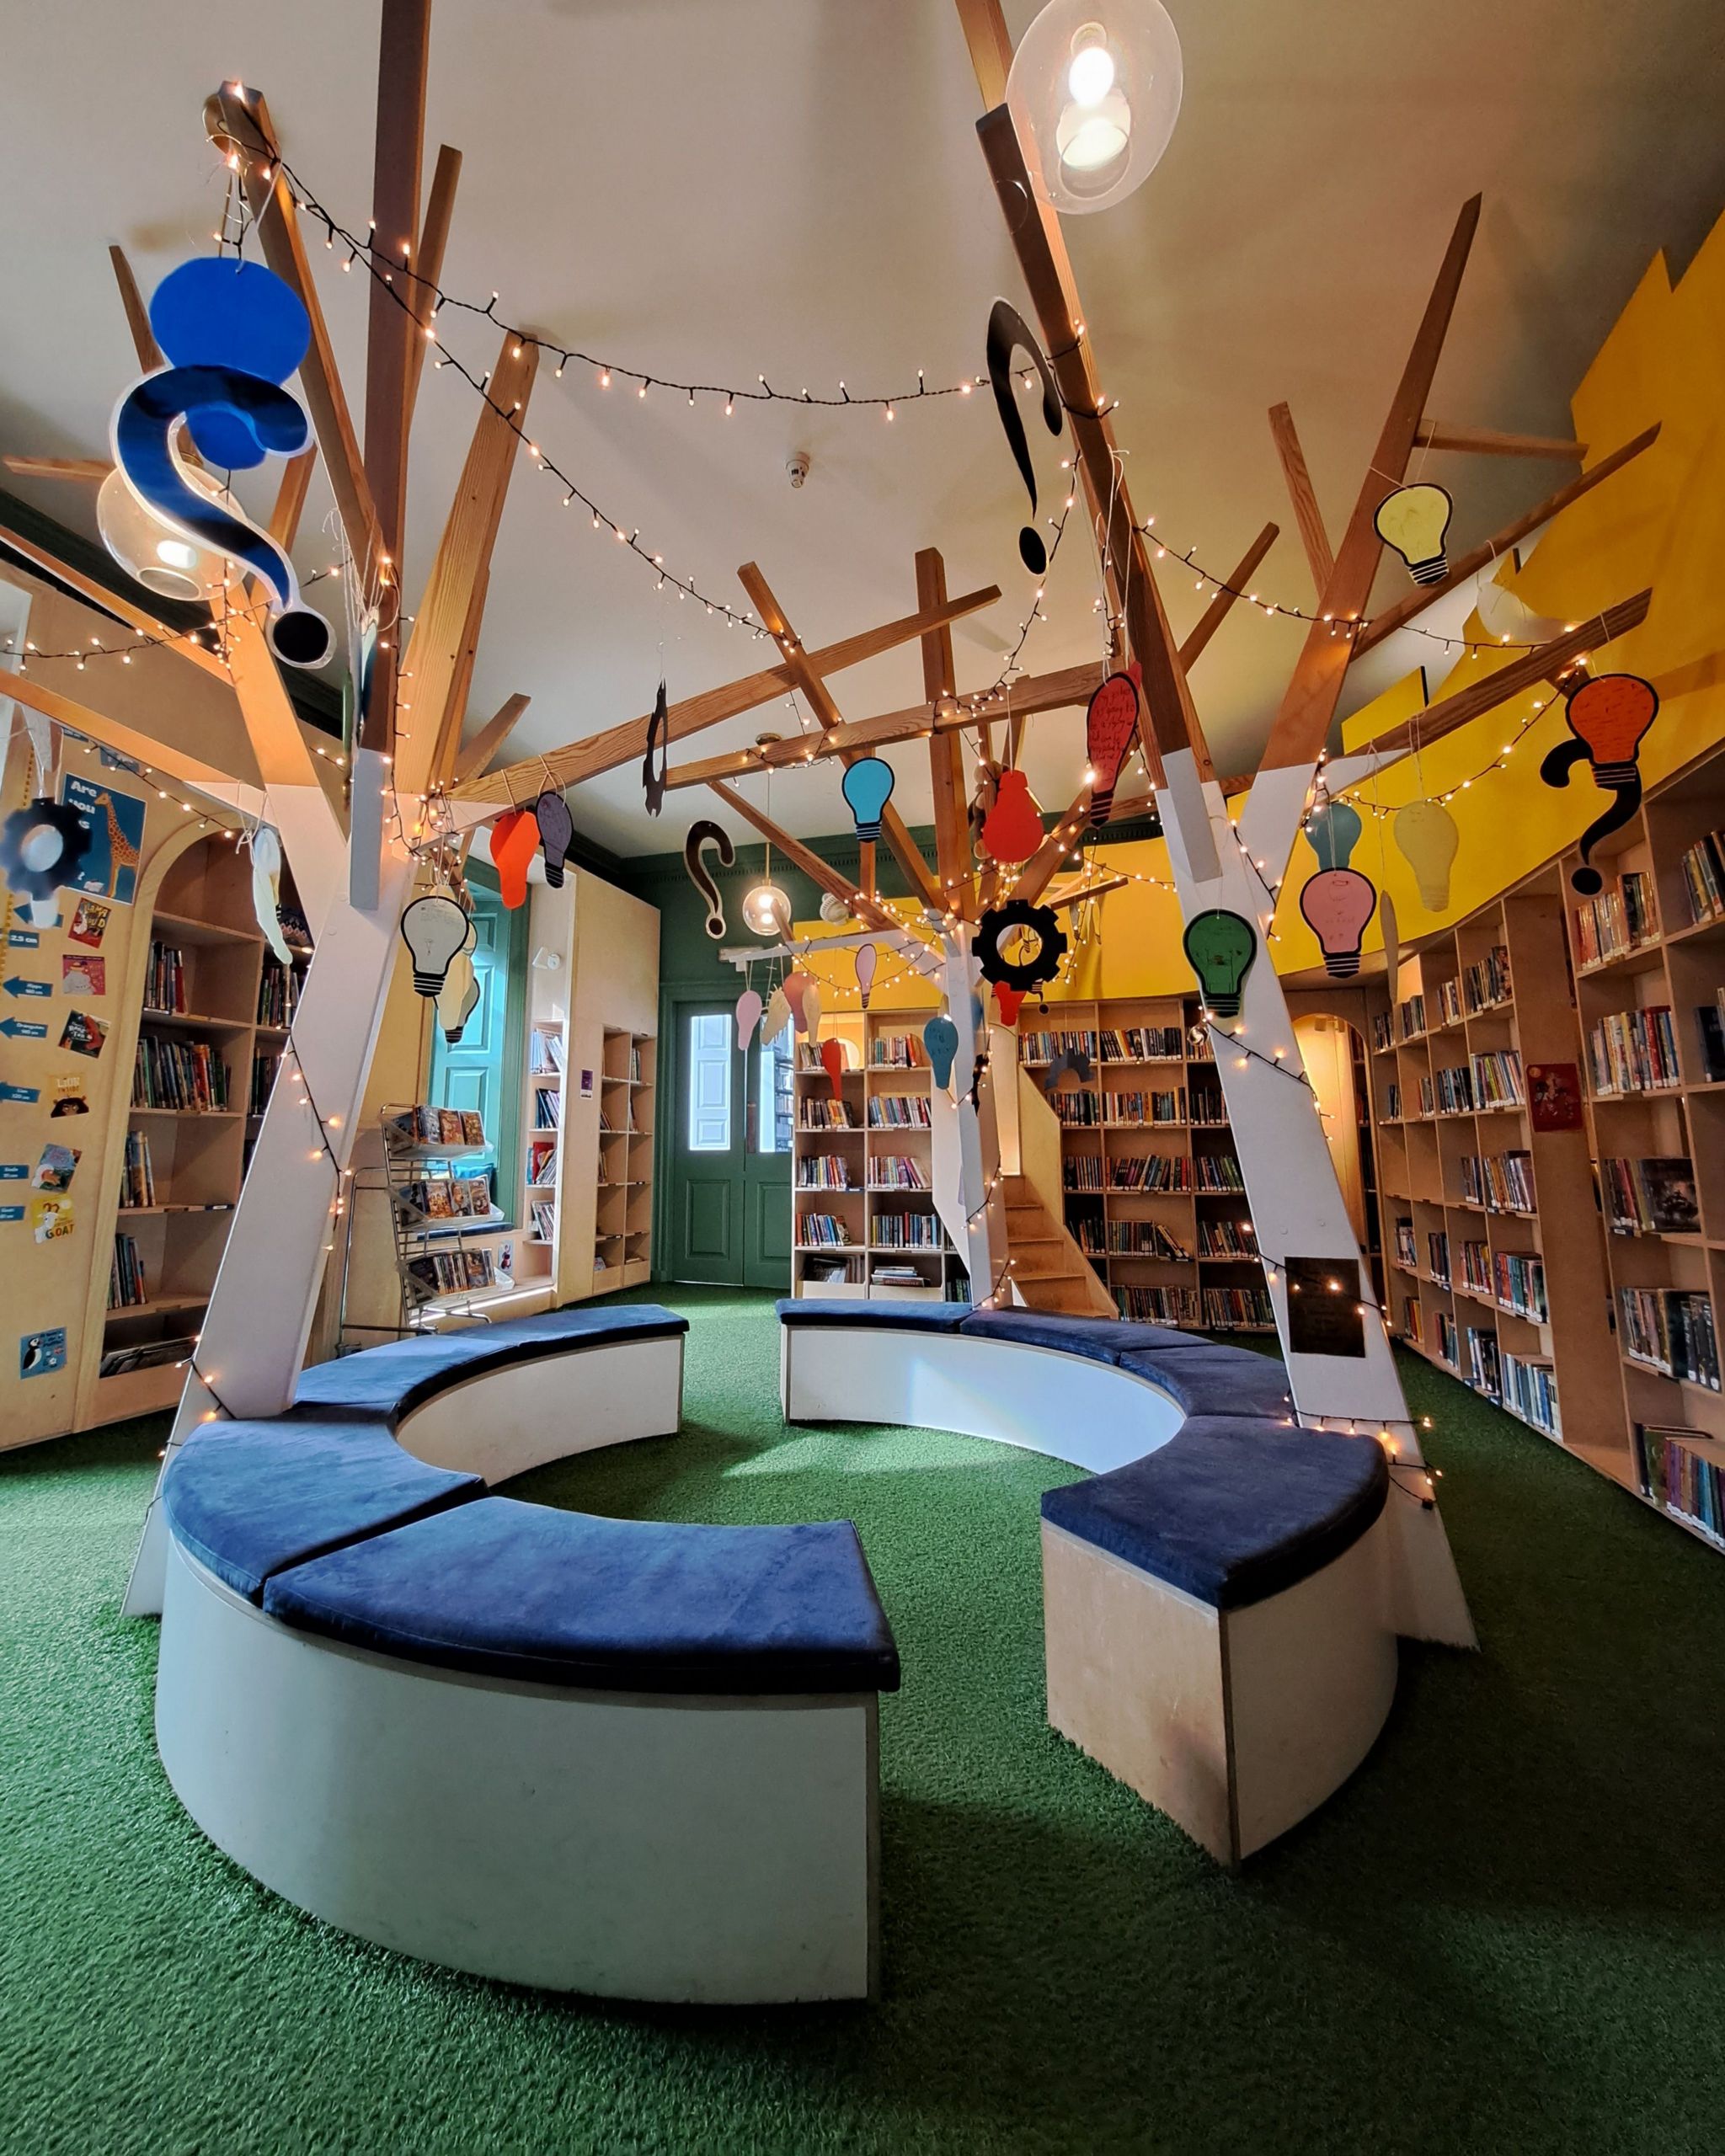 A seating area in the children's library